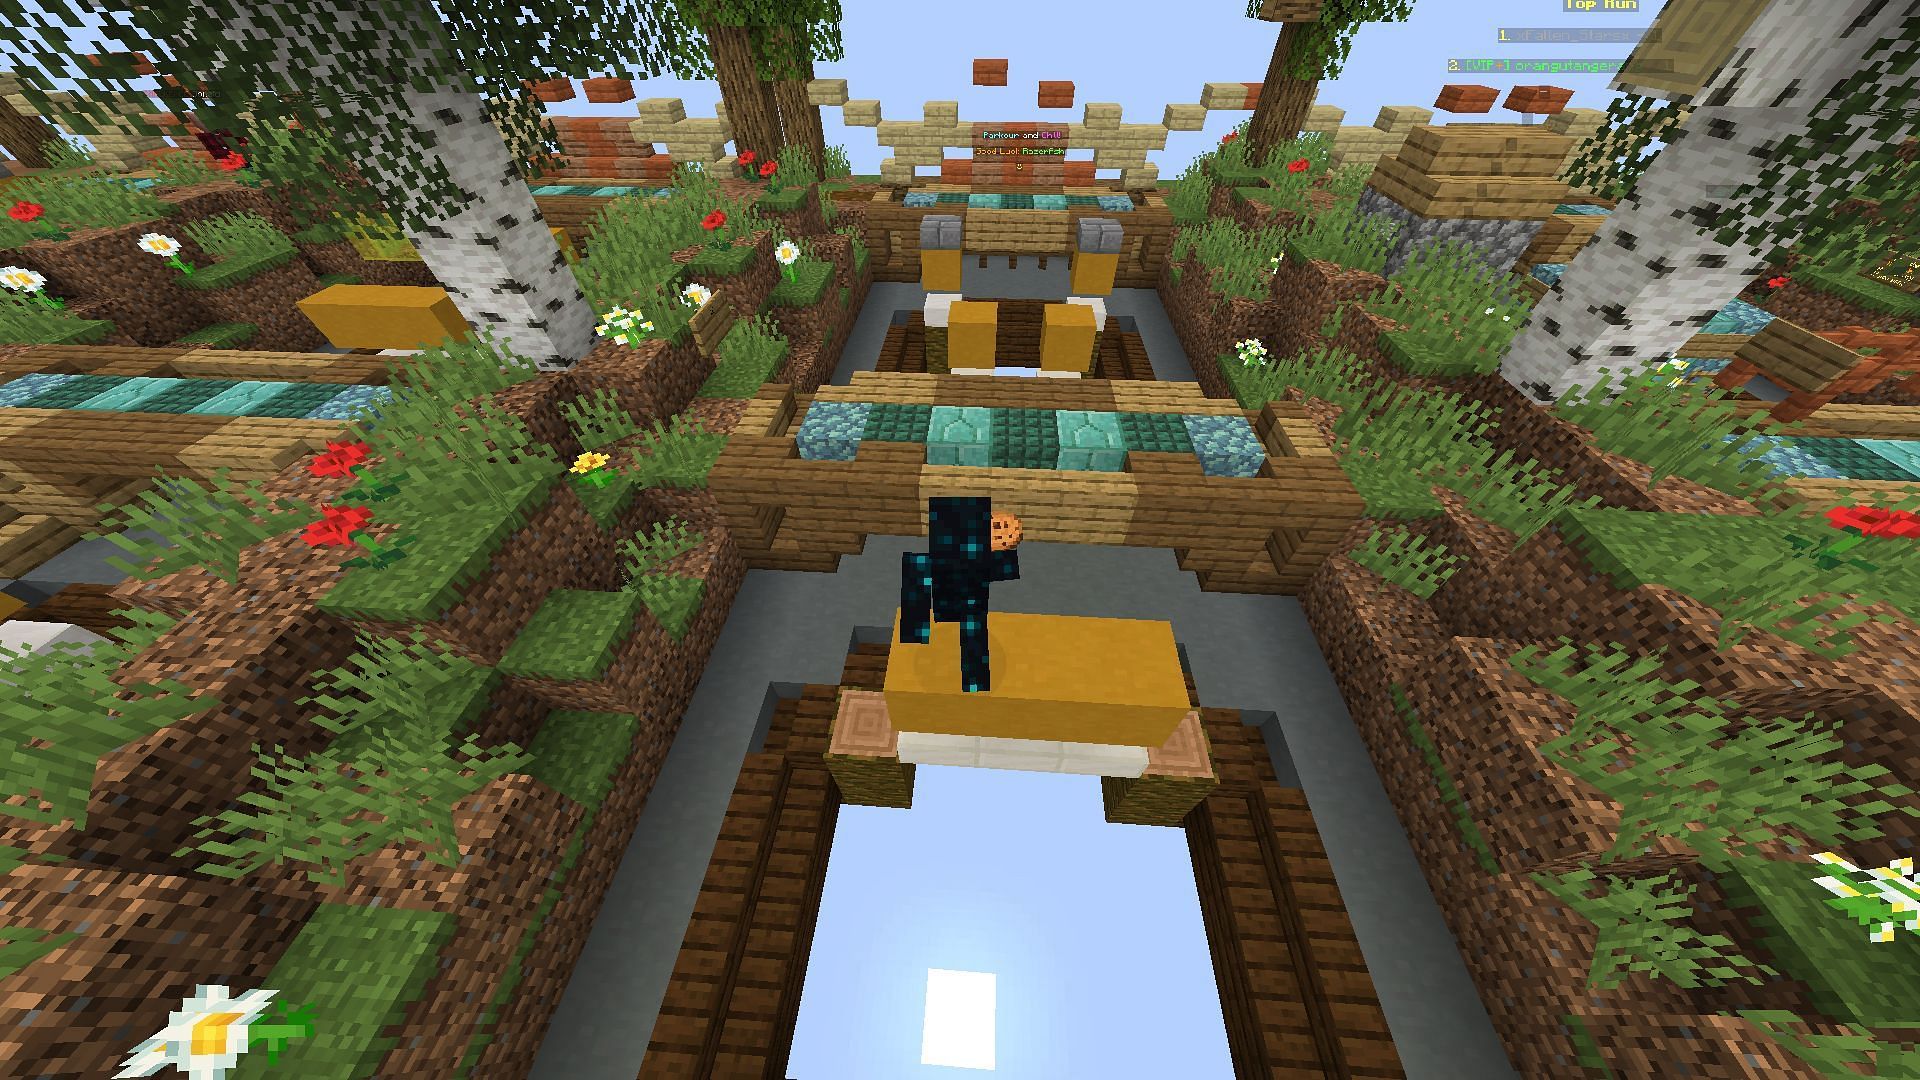 Parkour is a fun activity to do with friends in the game (Image via Mojang)